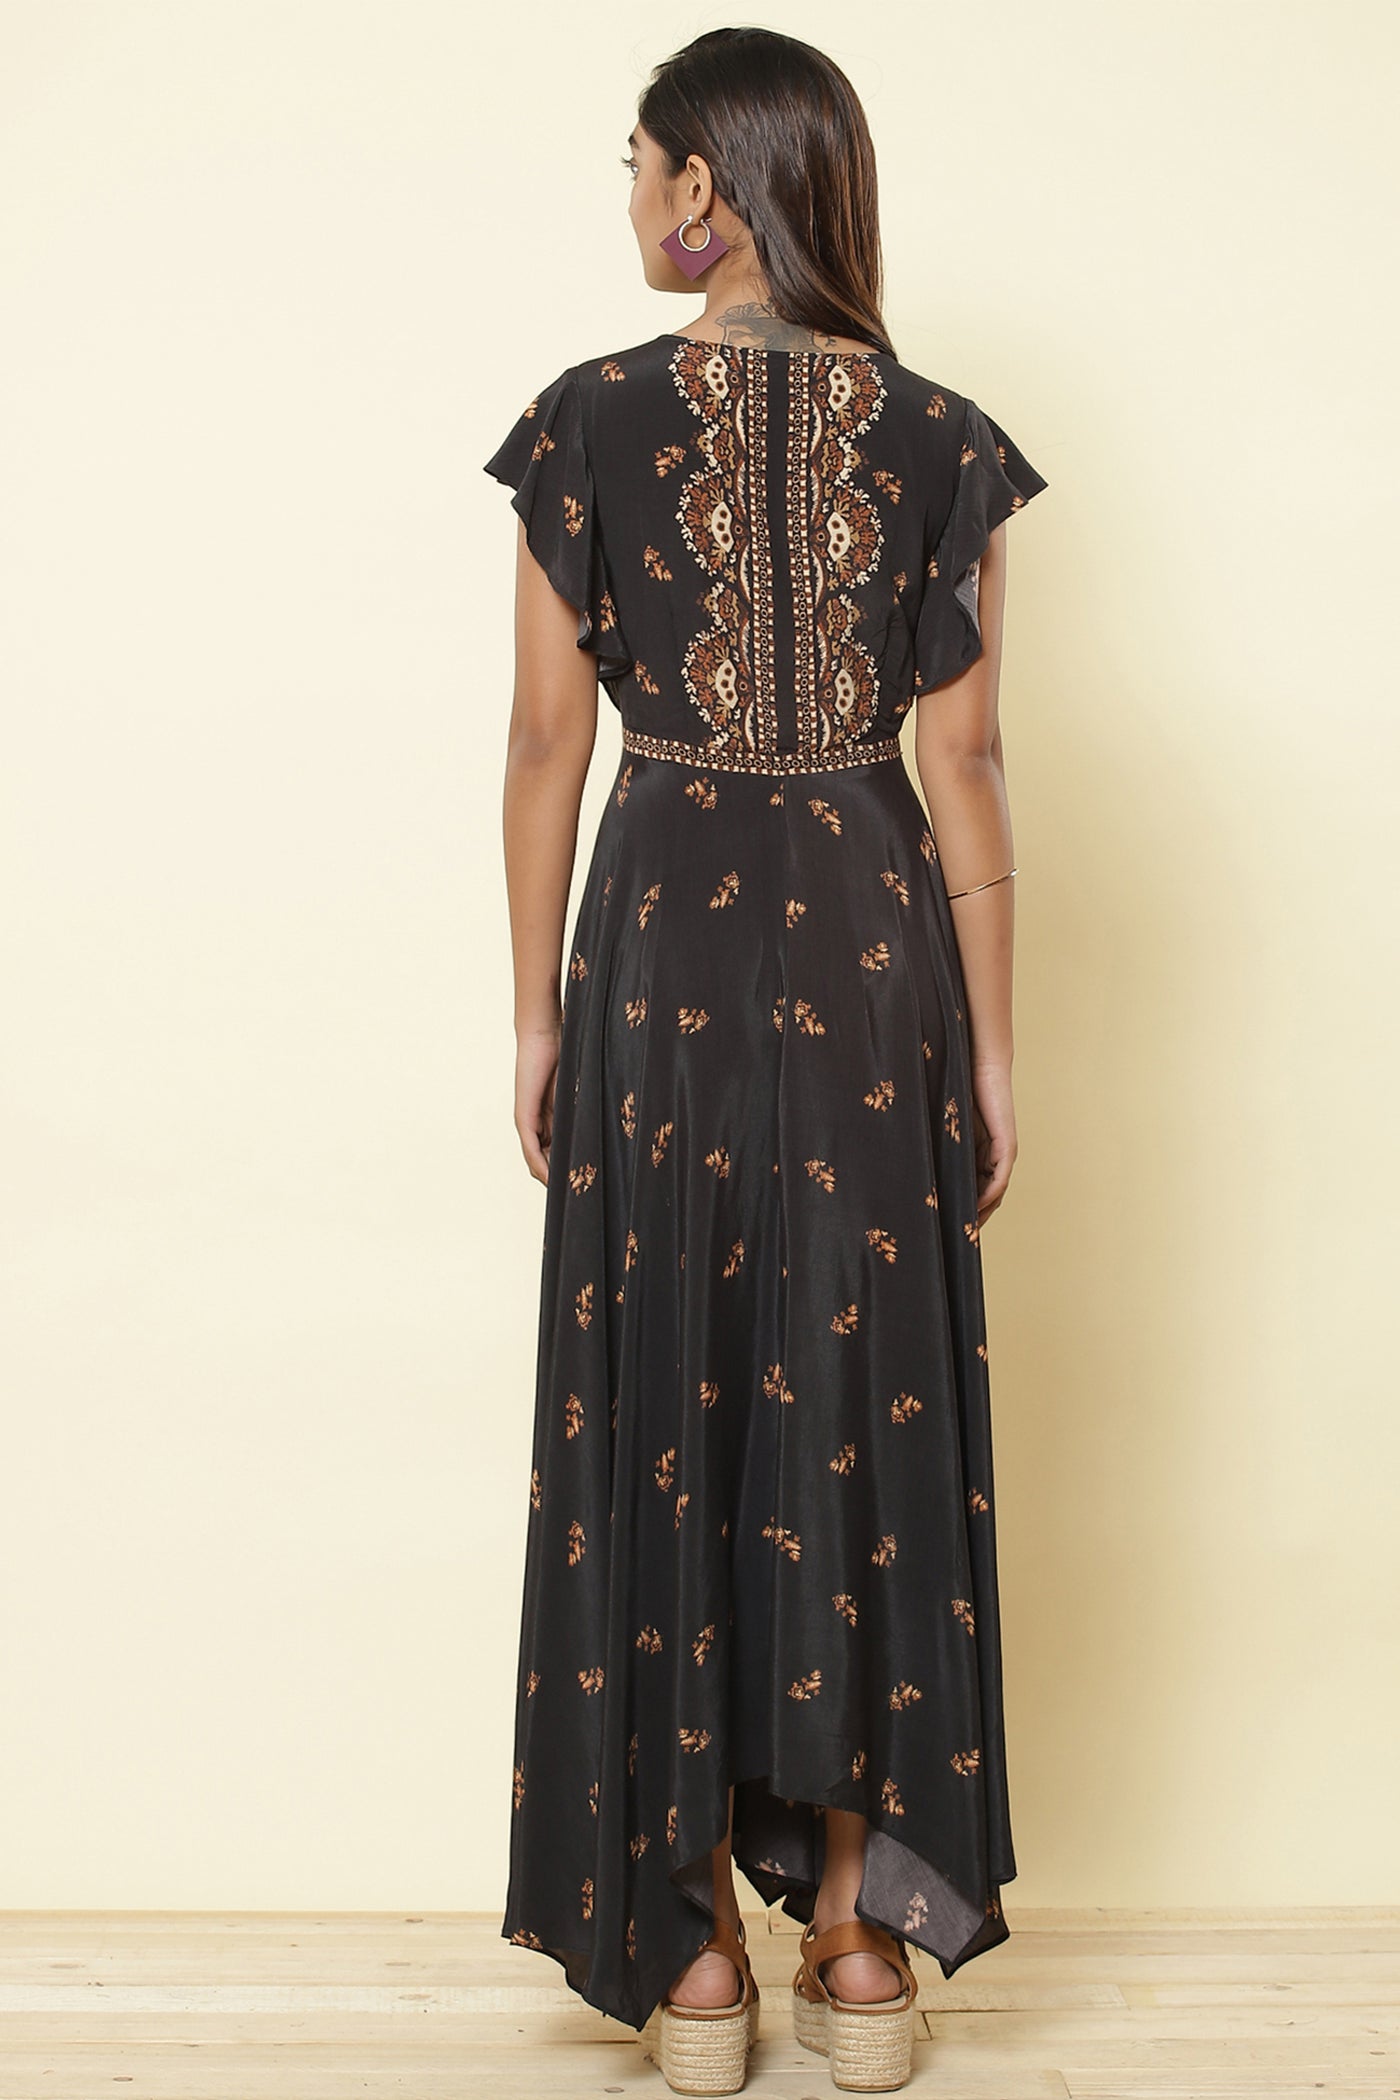 Ritu Kumar - Black Ruffled Sleeve Long Dress - Exclusive Indian Designer Wear Latest Collections Available at Melange Singapore.